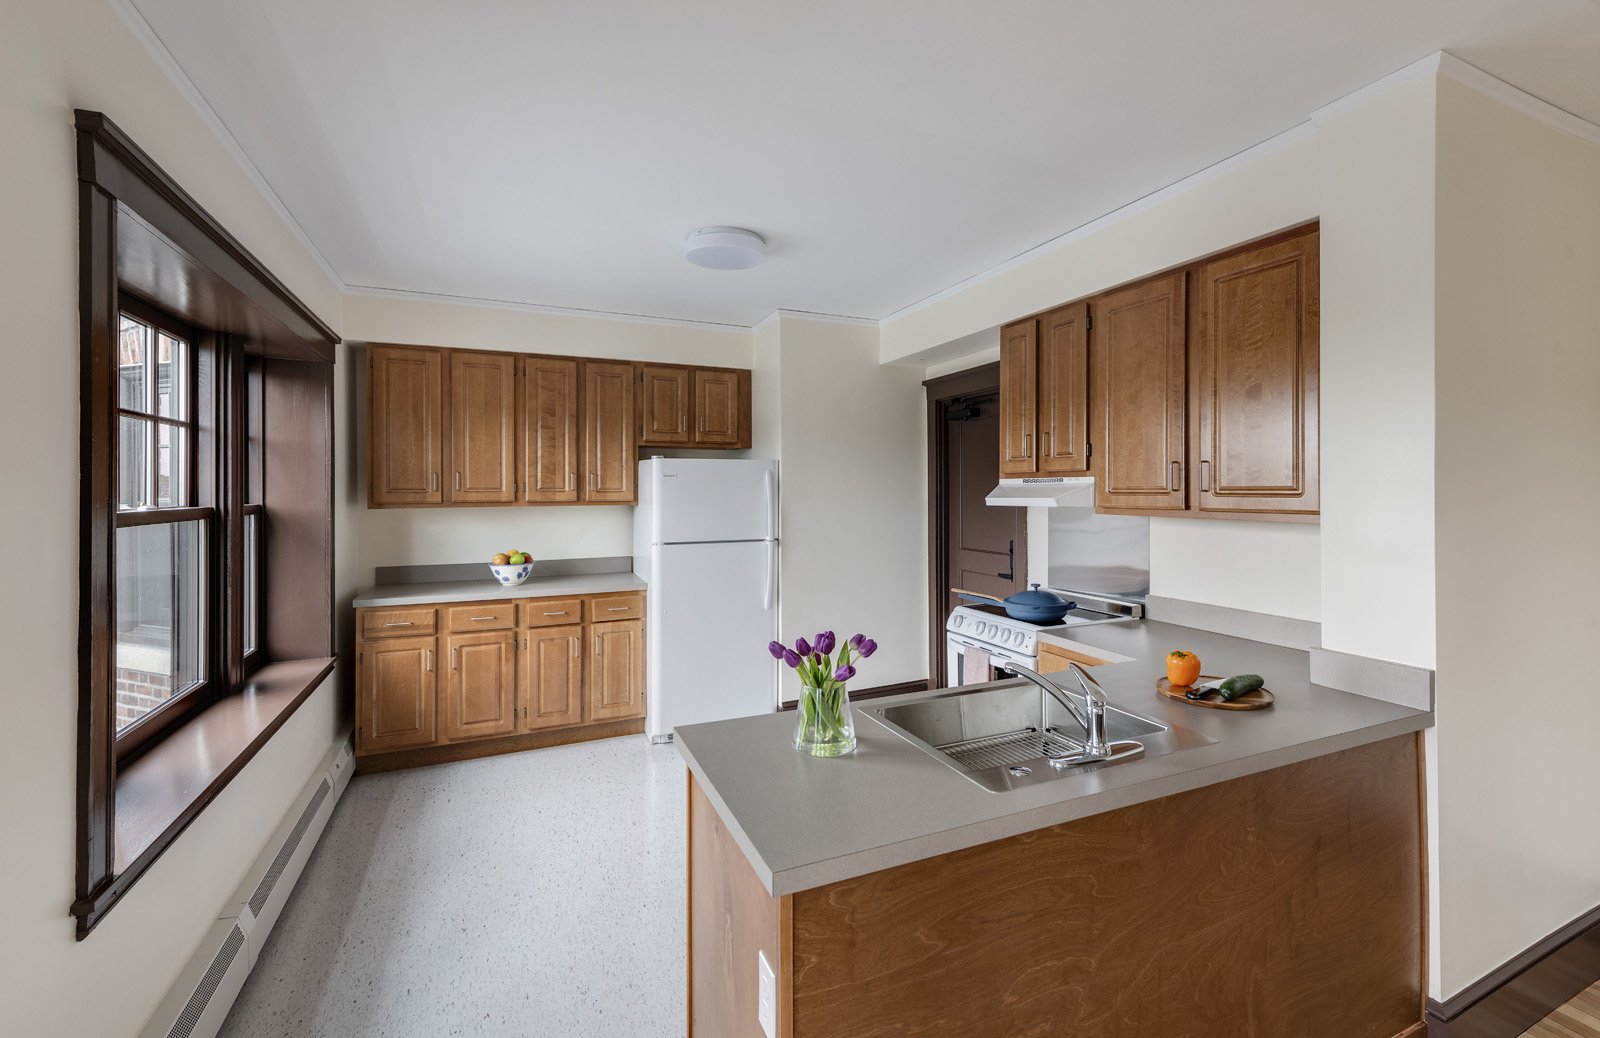 Multifamily housing kitchen with electric cooktop